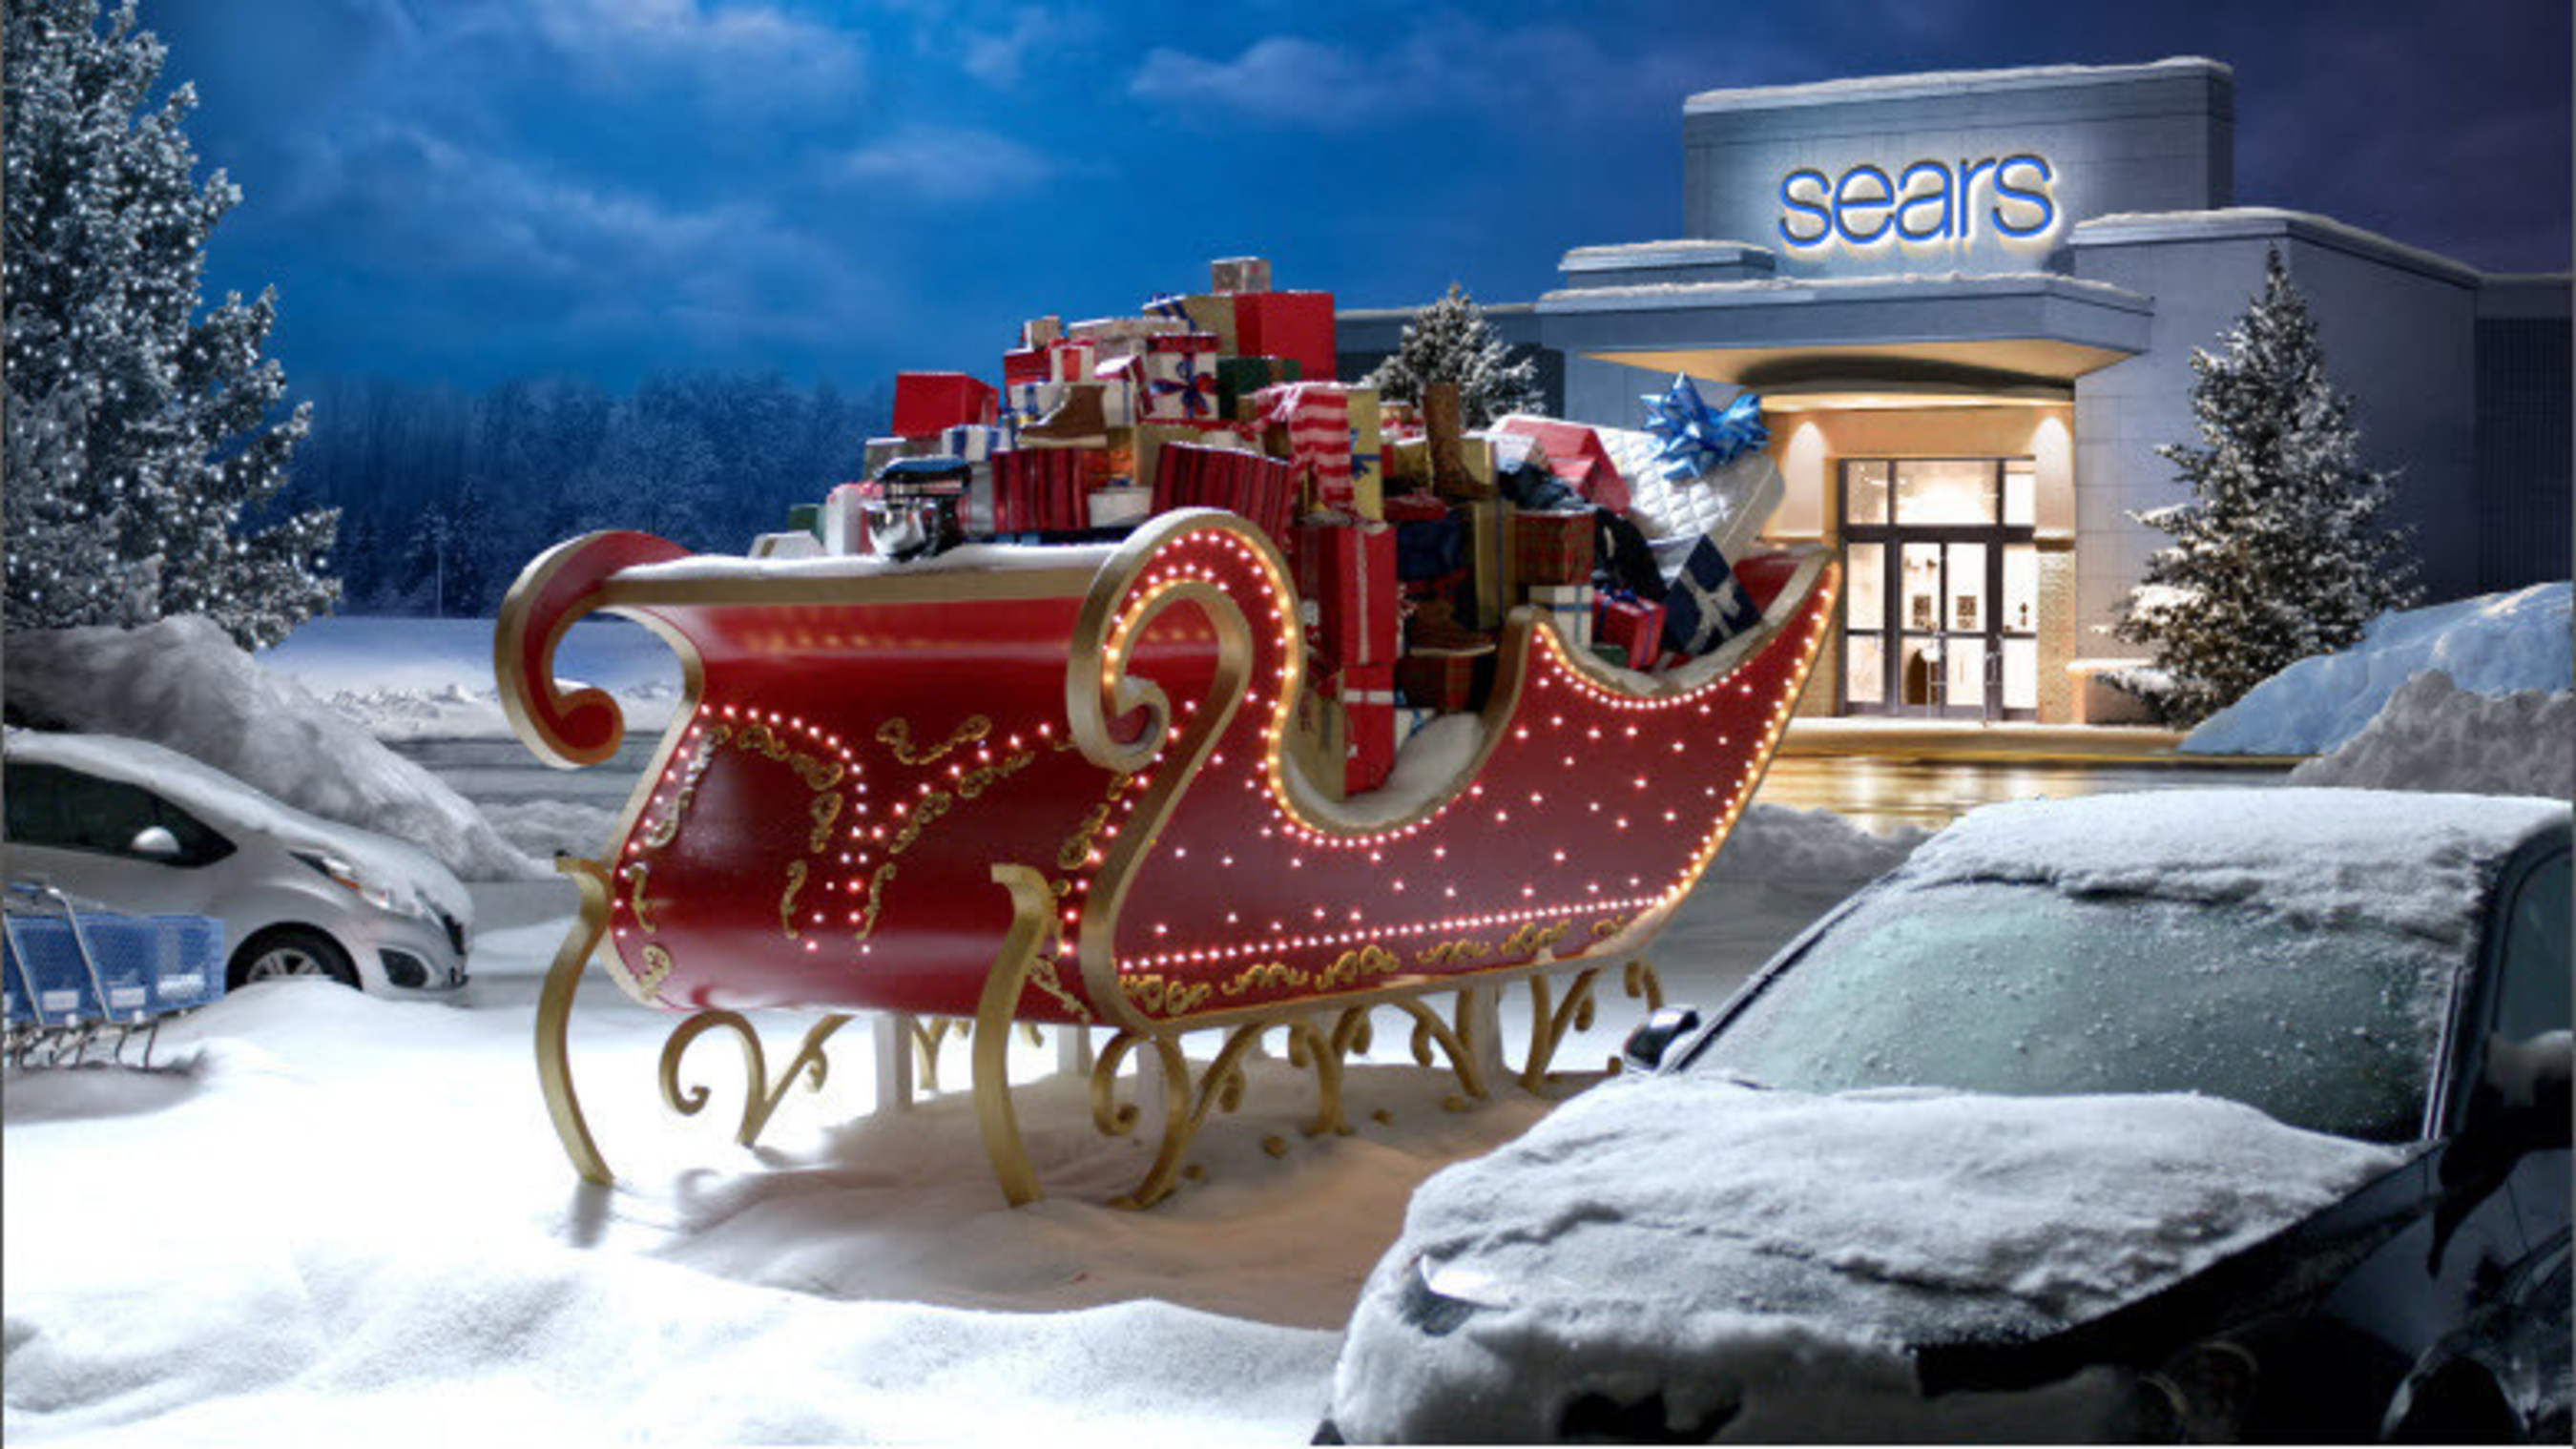 Sears, a leading integrated retailer, is kicking off the holiday season with its "Bring the Sleigh" campaign, featuring online, in-store and mobile shopping conveniences like In-Vehicle Pickup, which lets customers pick up their online purchases at any Sears store in less than five minutes without leaving their vehicle. Sears also announced it will open its doors starting at 6 p.m. on Thanksgiving Day.